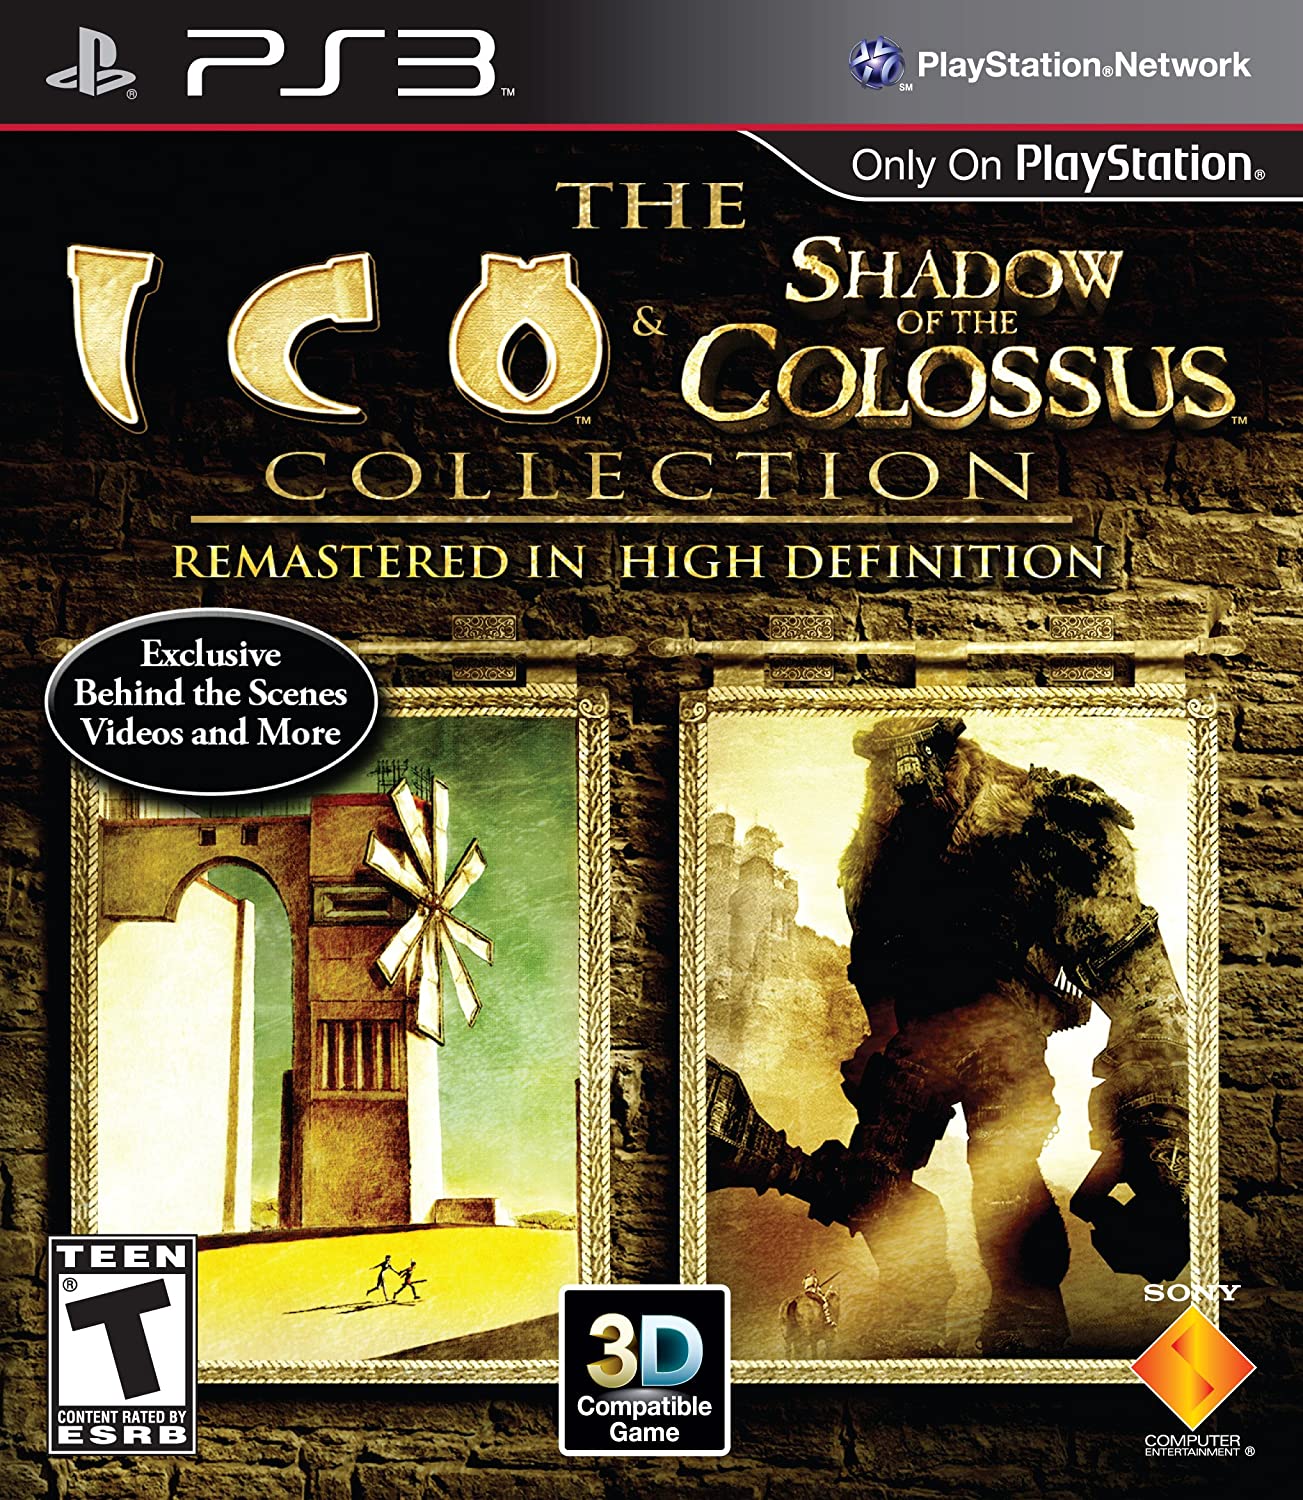 Remastered in HD with full stereoscopic 3D support, the ICO and Shadow of the Colossus Collection brings together two of the most highly-acclaimed single.